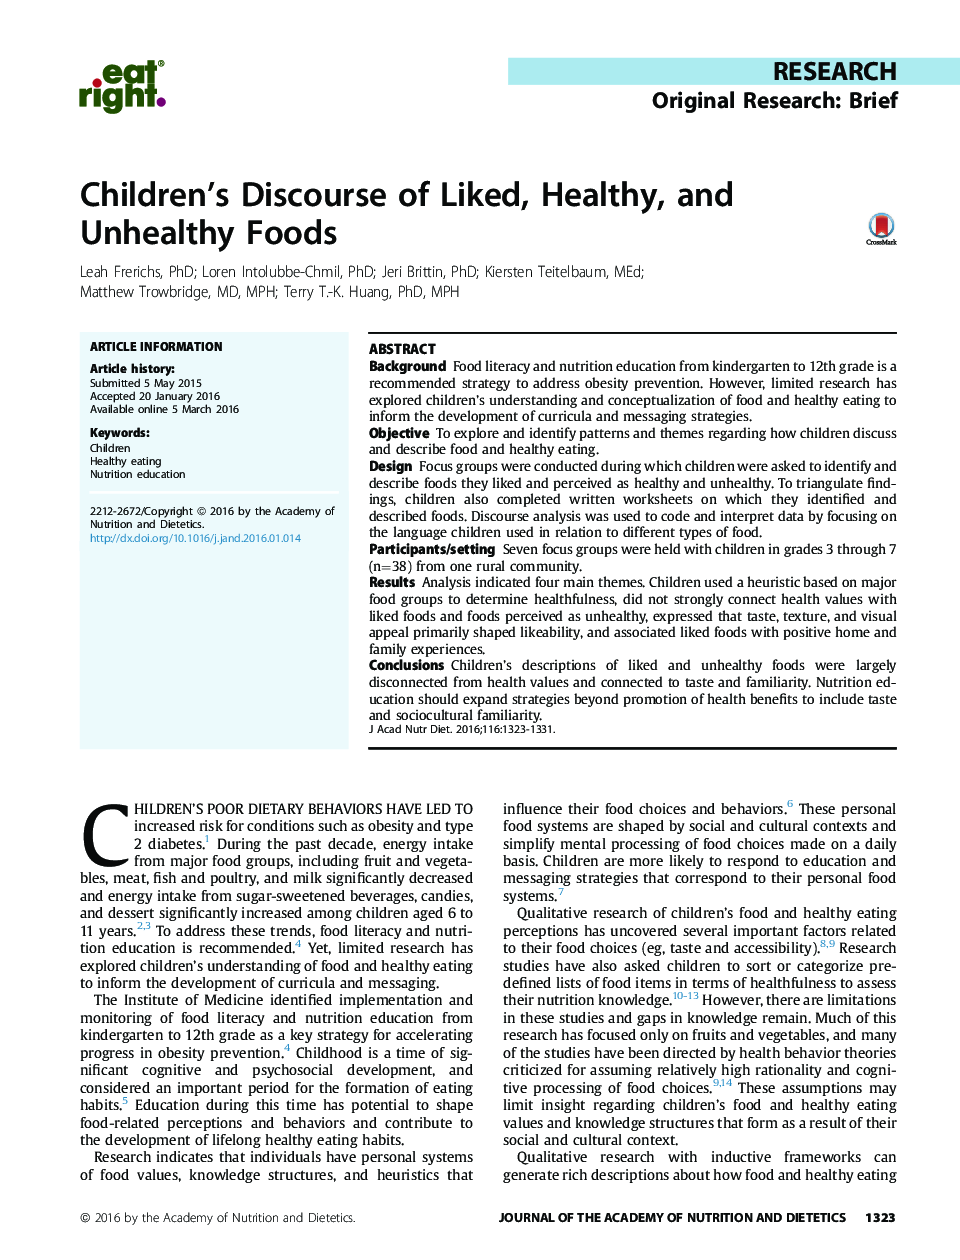 Children’s Discourse of Liked, Healthy, and Unhealthy Foods 